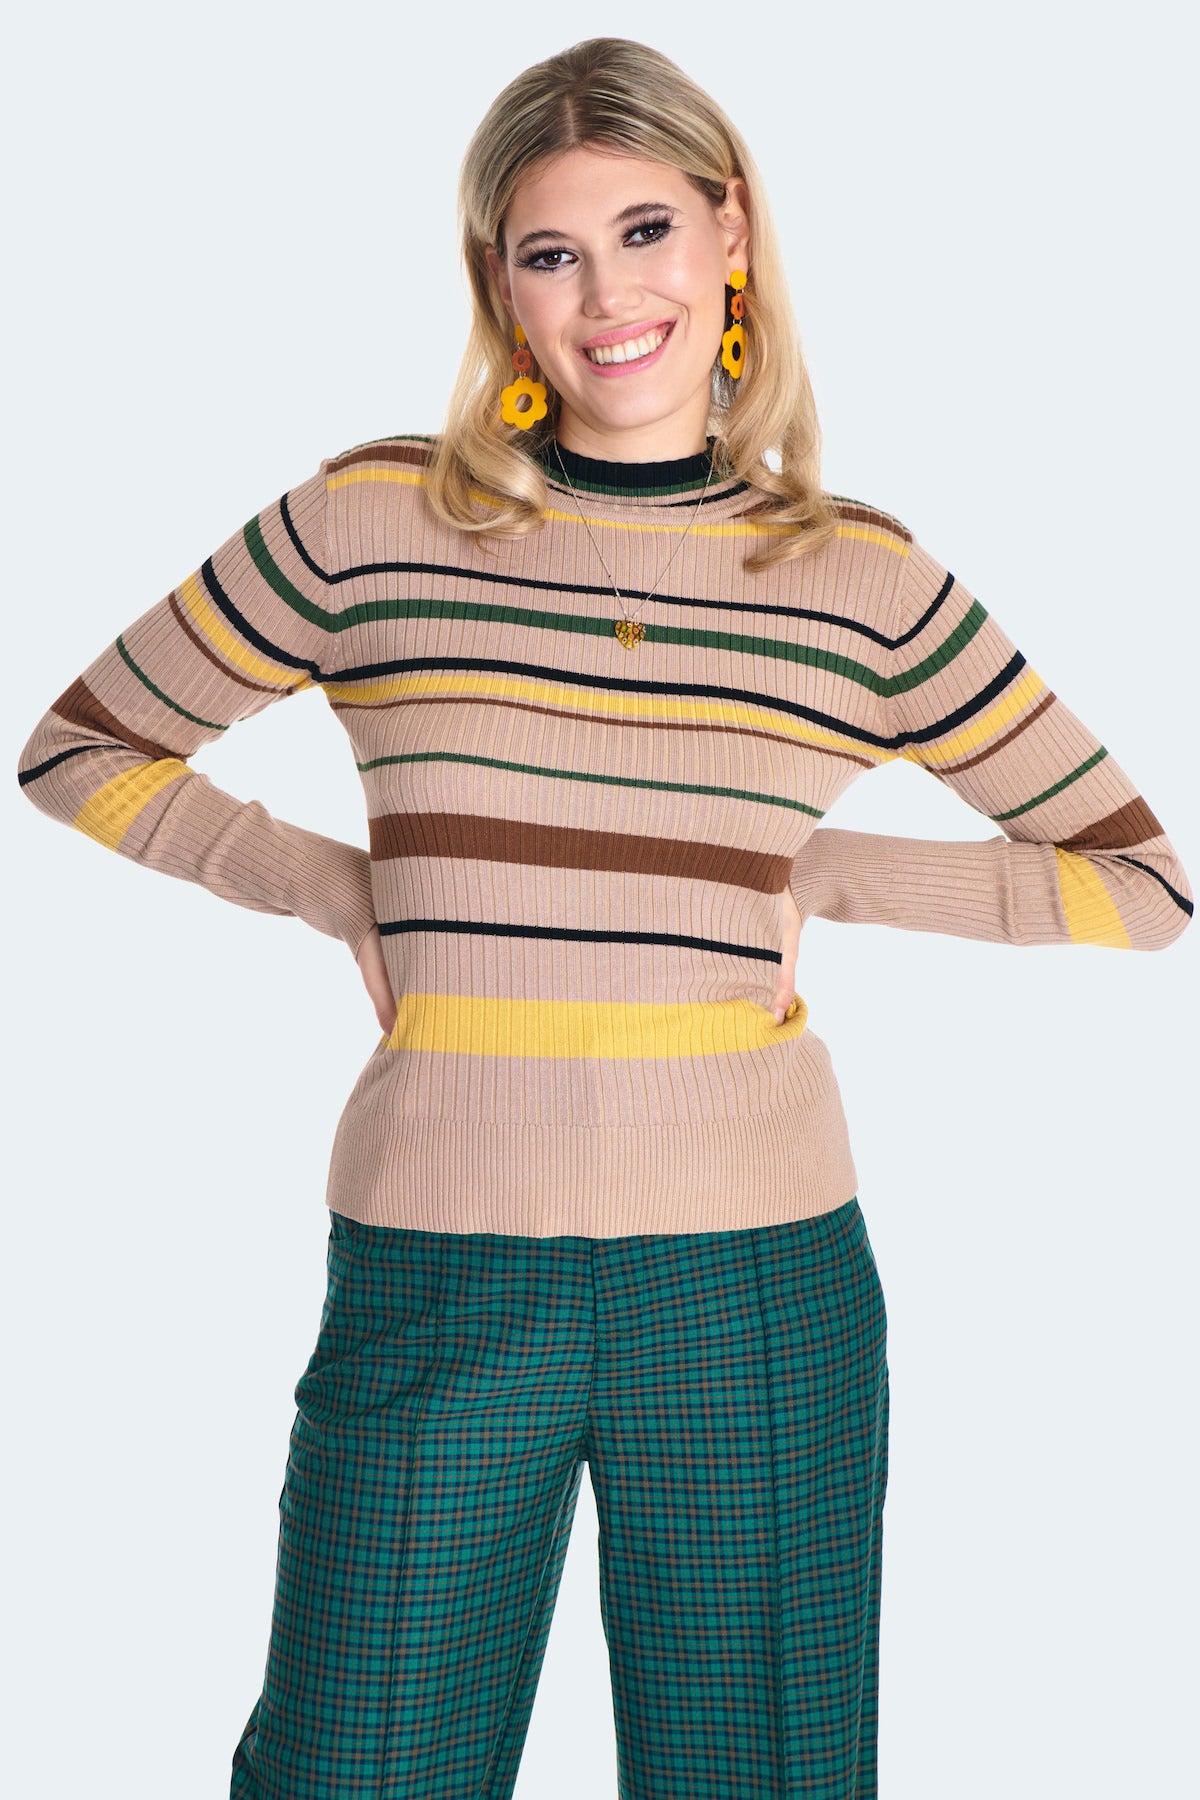 70's Stripes Ribbed Sweater (2 Colorways)